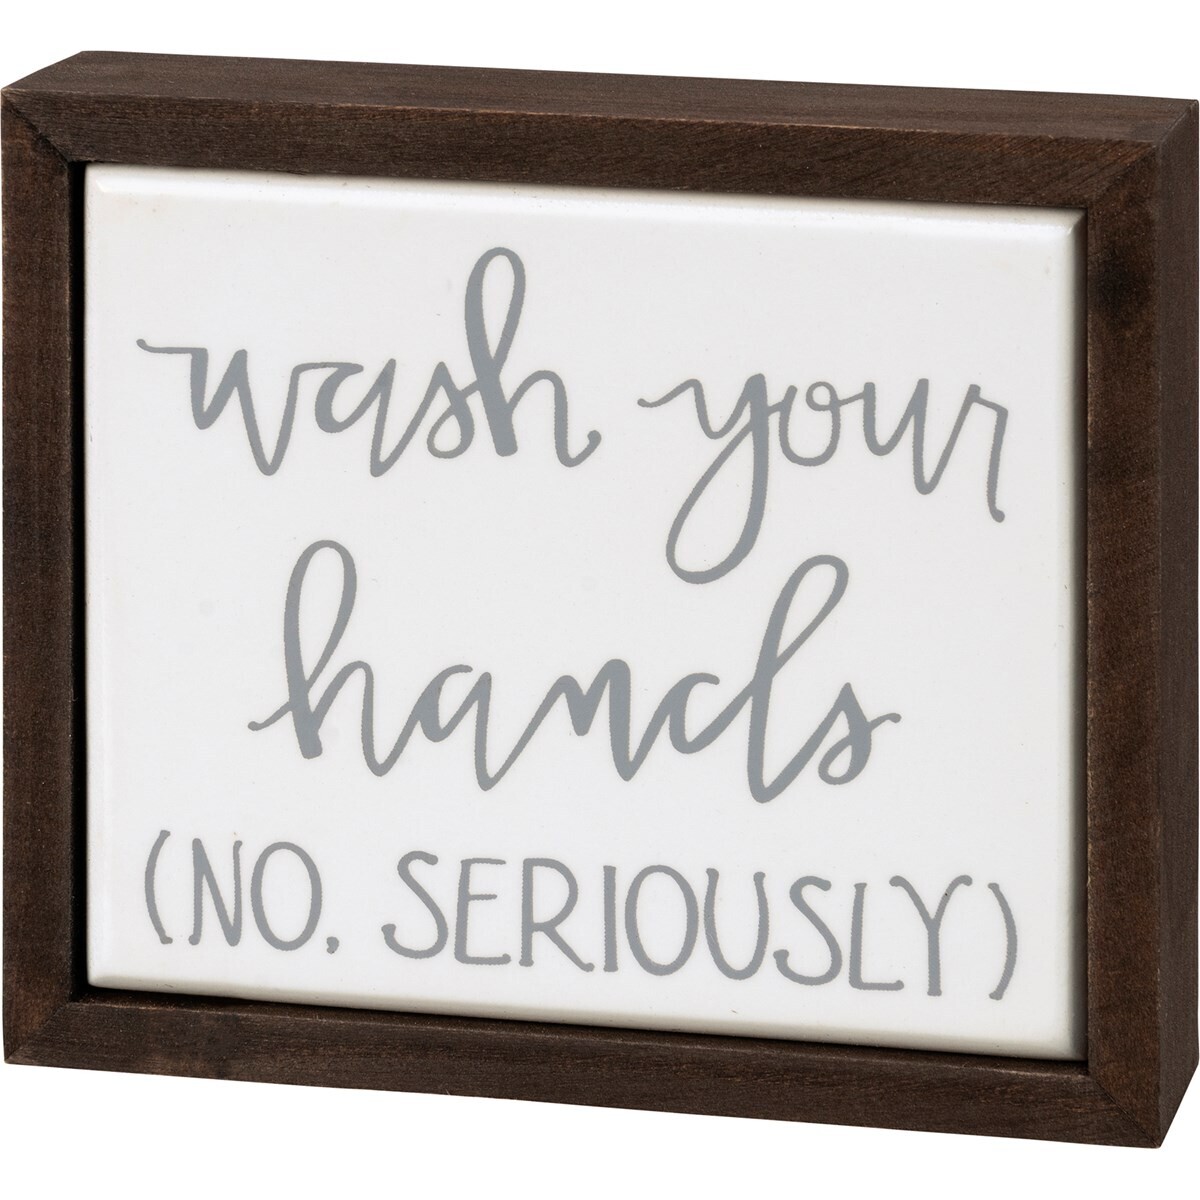 Wash Your Hands Mini Box Sign